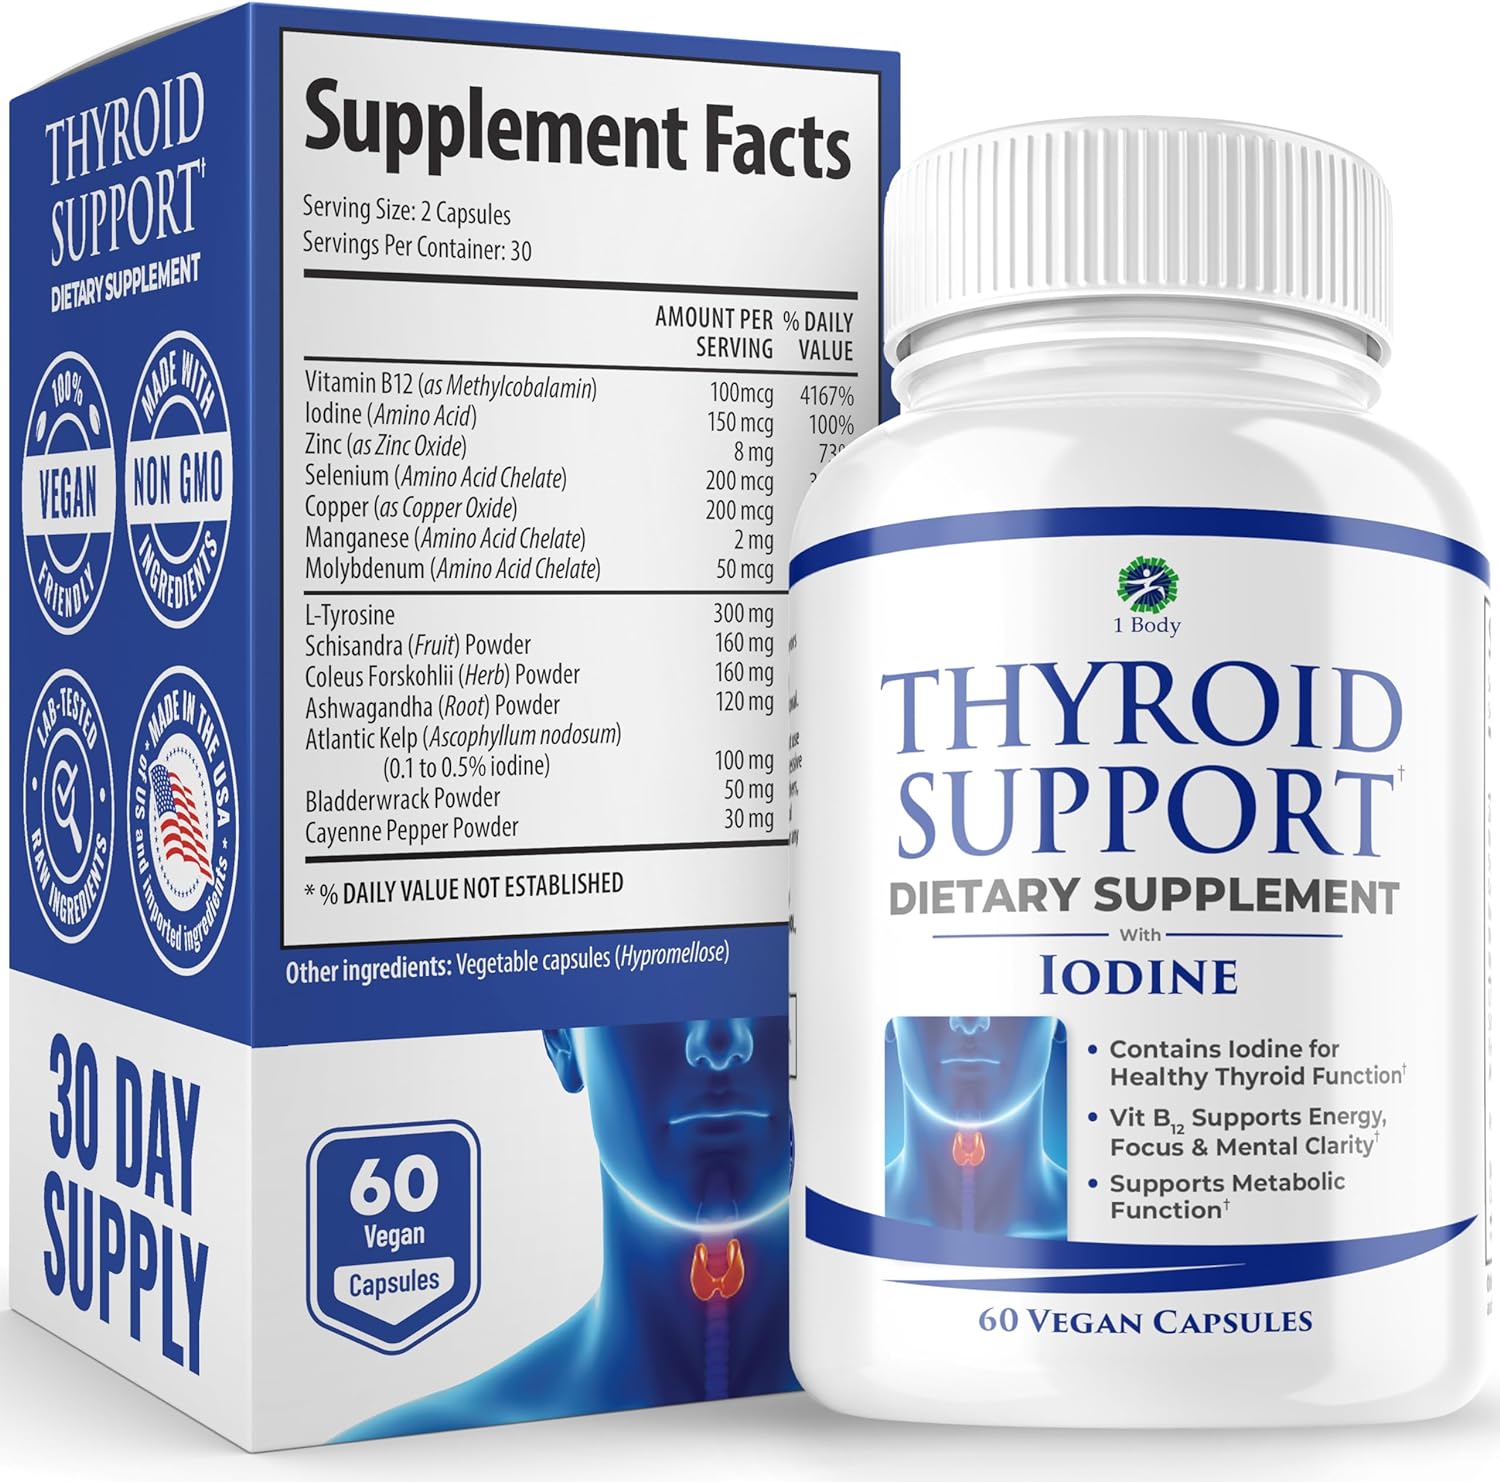 1 Body Thyroid Support Supplement with Iodine - Energy  Focus Support Formula - Vegetarian  Non-GMO - Vitamin B12 Complex, Zinc, Selenium, Ashwagandha, Copper  More 30 Day Supply